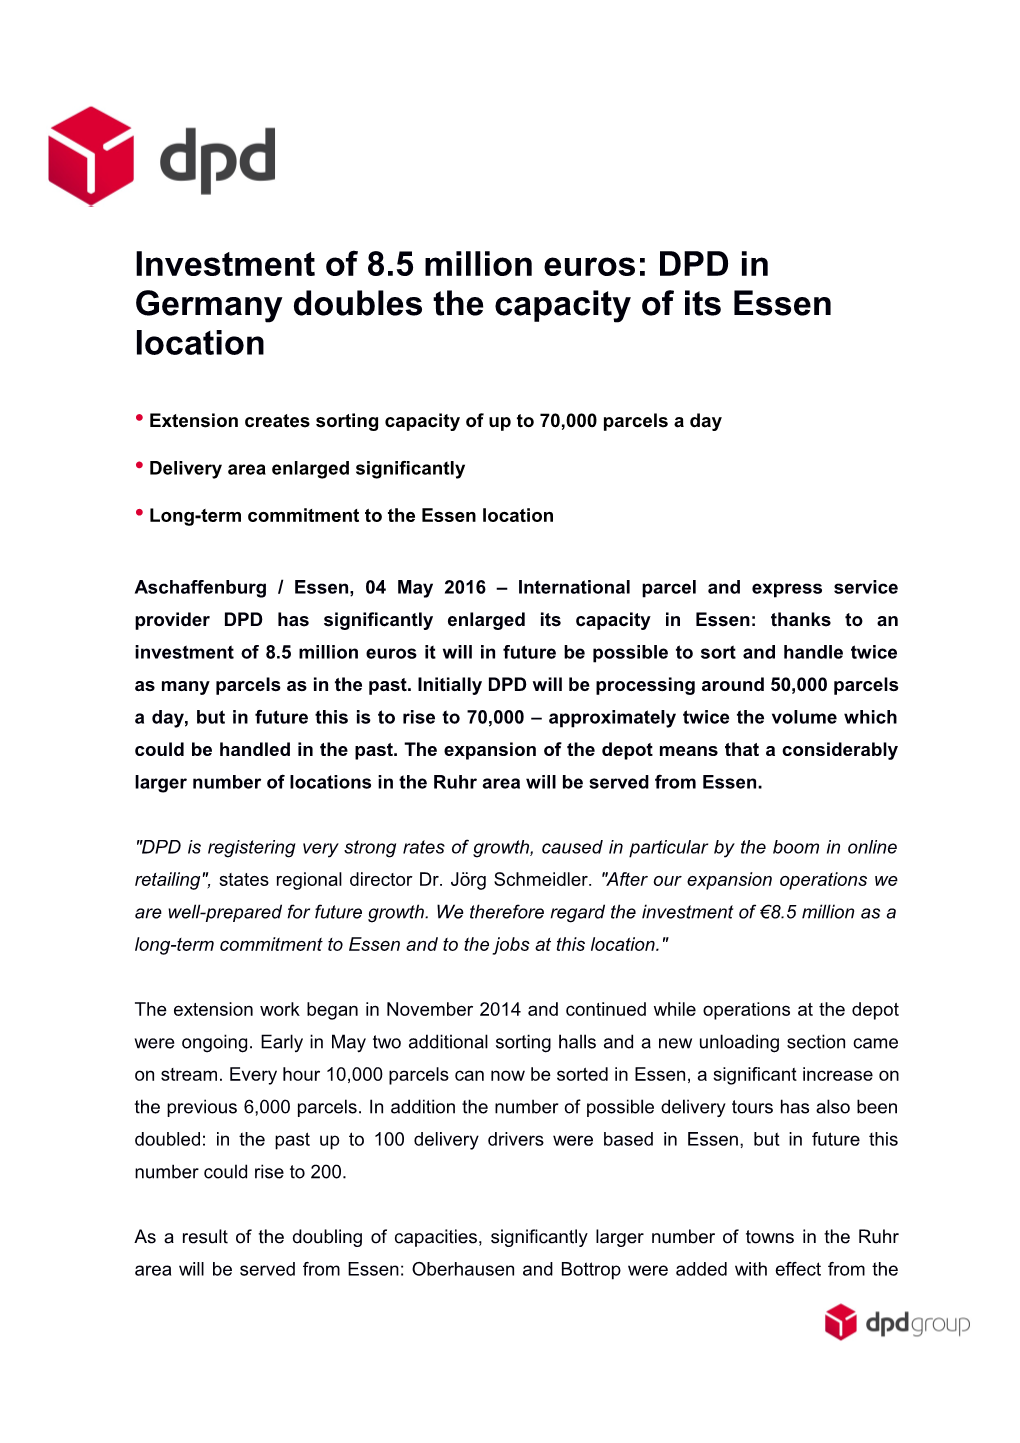 Investment of 8.5 Million Euros: DPD in Germany Doubles the Capacity of Its Essen Location